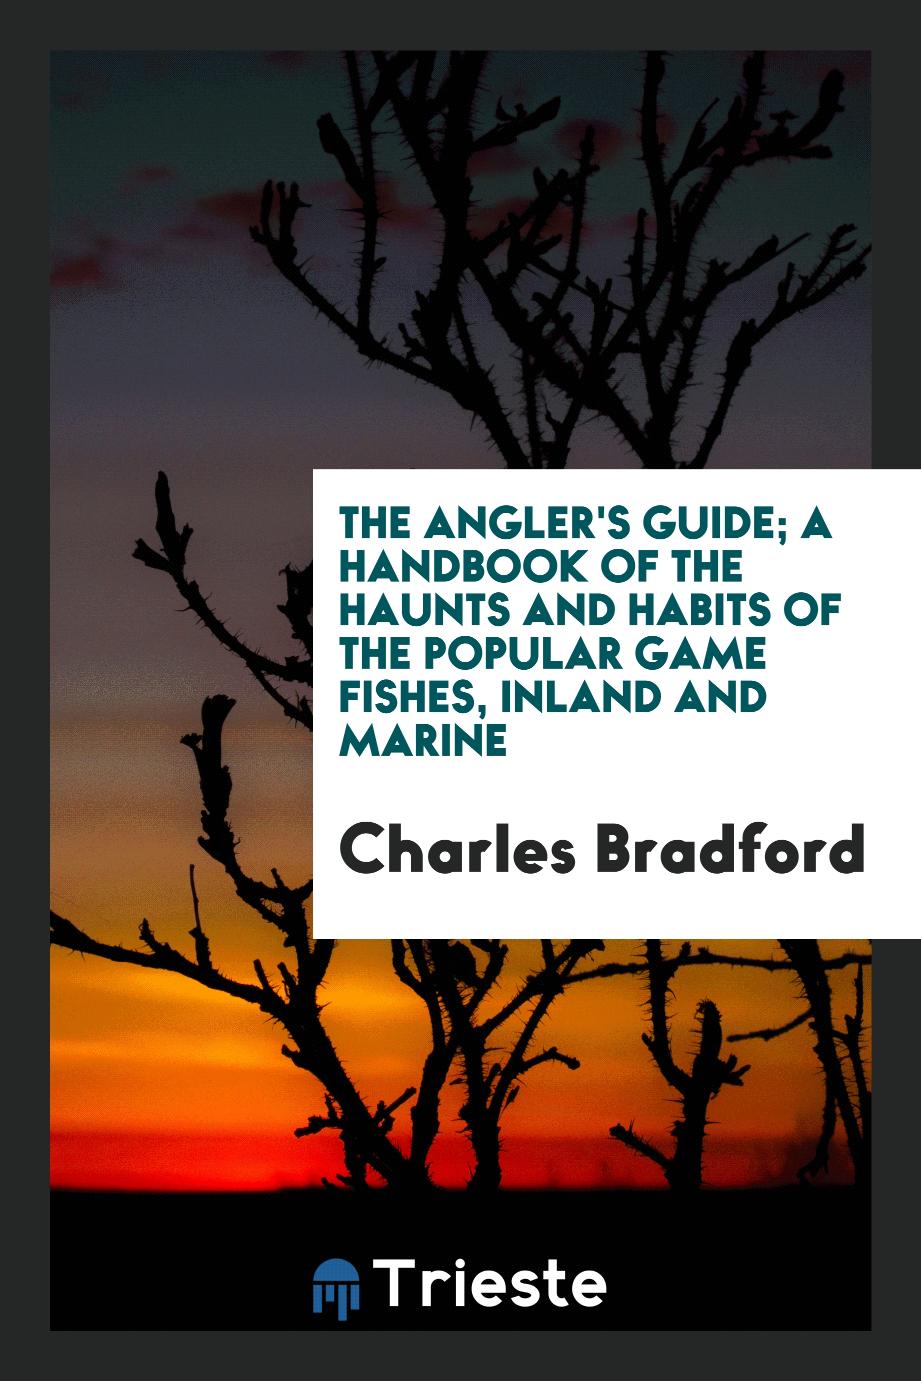 The angler's guide; a handbook of the haunts and habits of the popular game fishes, inland and marine